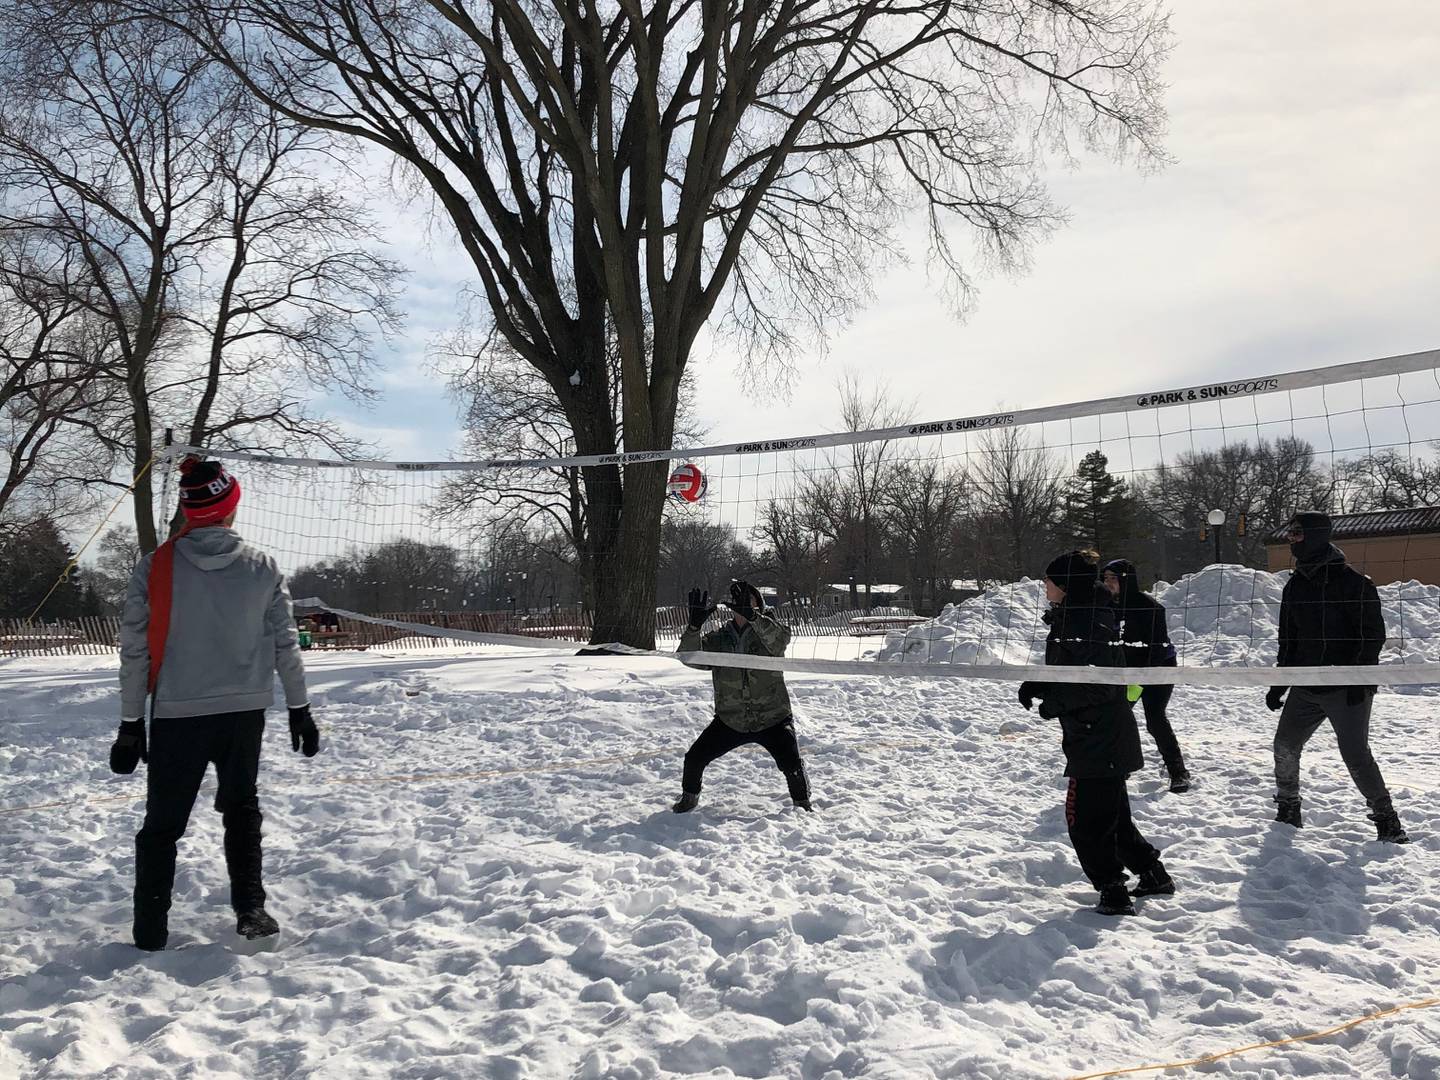 The Snow Volleyball Tournament was held last year for the first time at Main Beach. It will take place this year on Saturday, Feb. 19, 2022, as part of Chilly Fest.